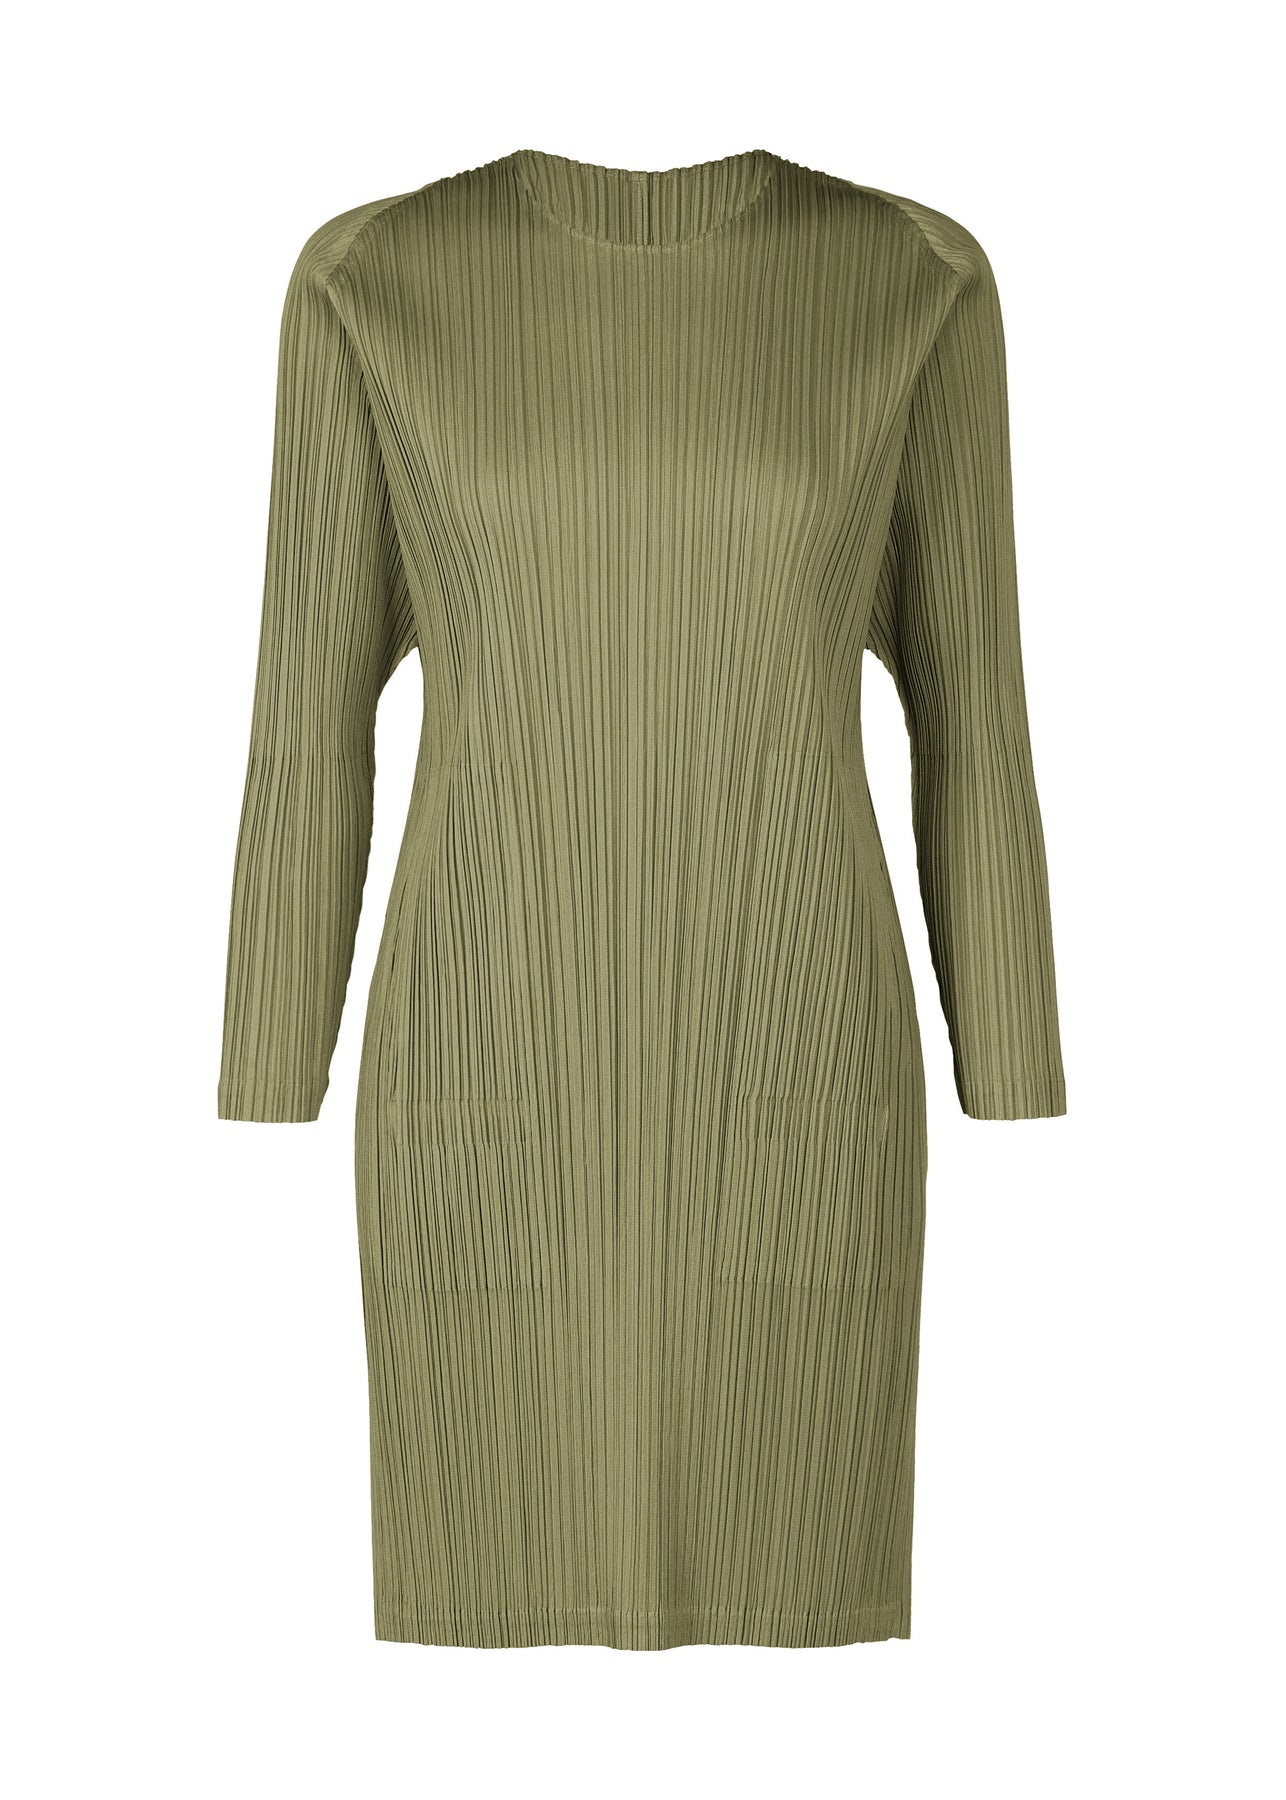 MONTHLY COLORS : JANUARY DRESS | The official ISSEY MIYAKE ONLINE 